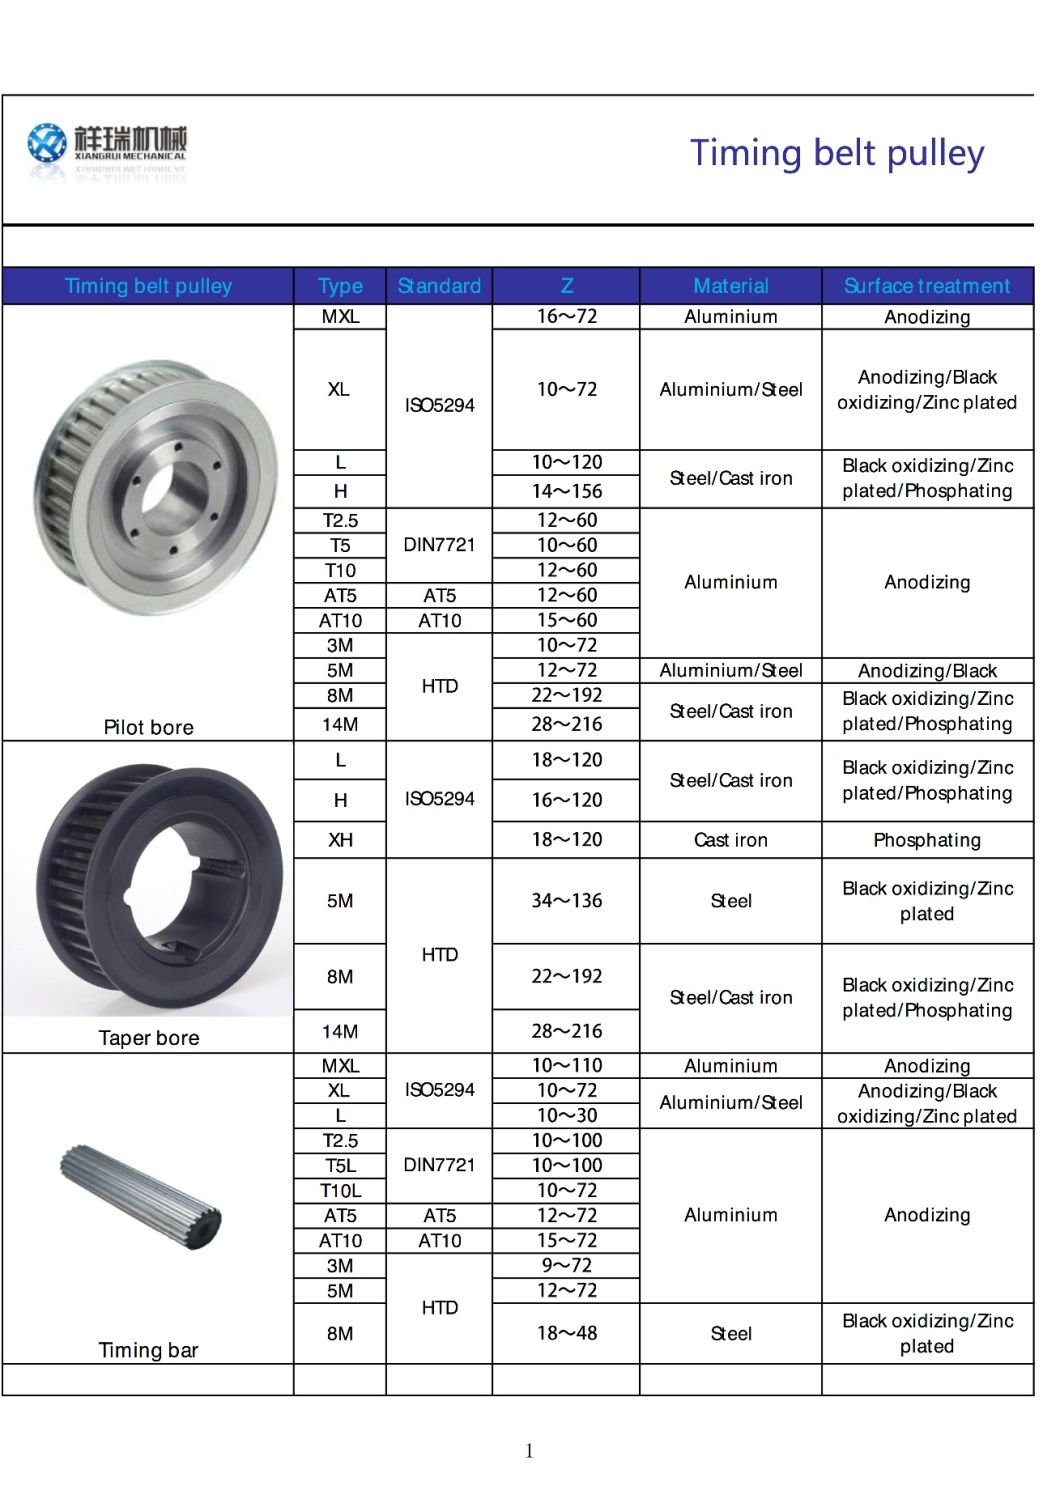 High Precision Casting Stainless Steel Timing Belt Pulley